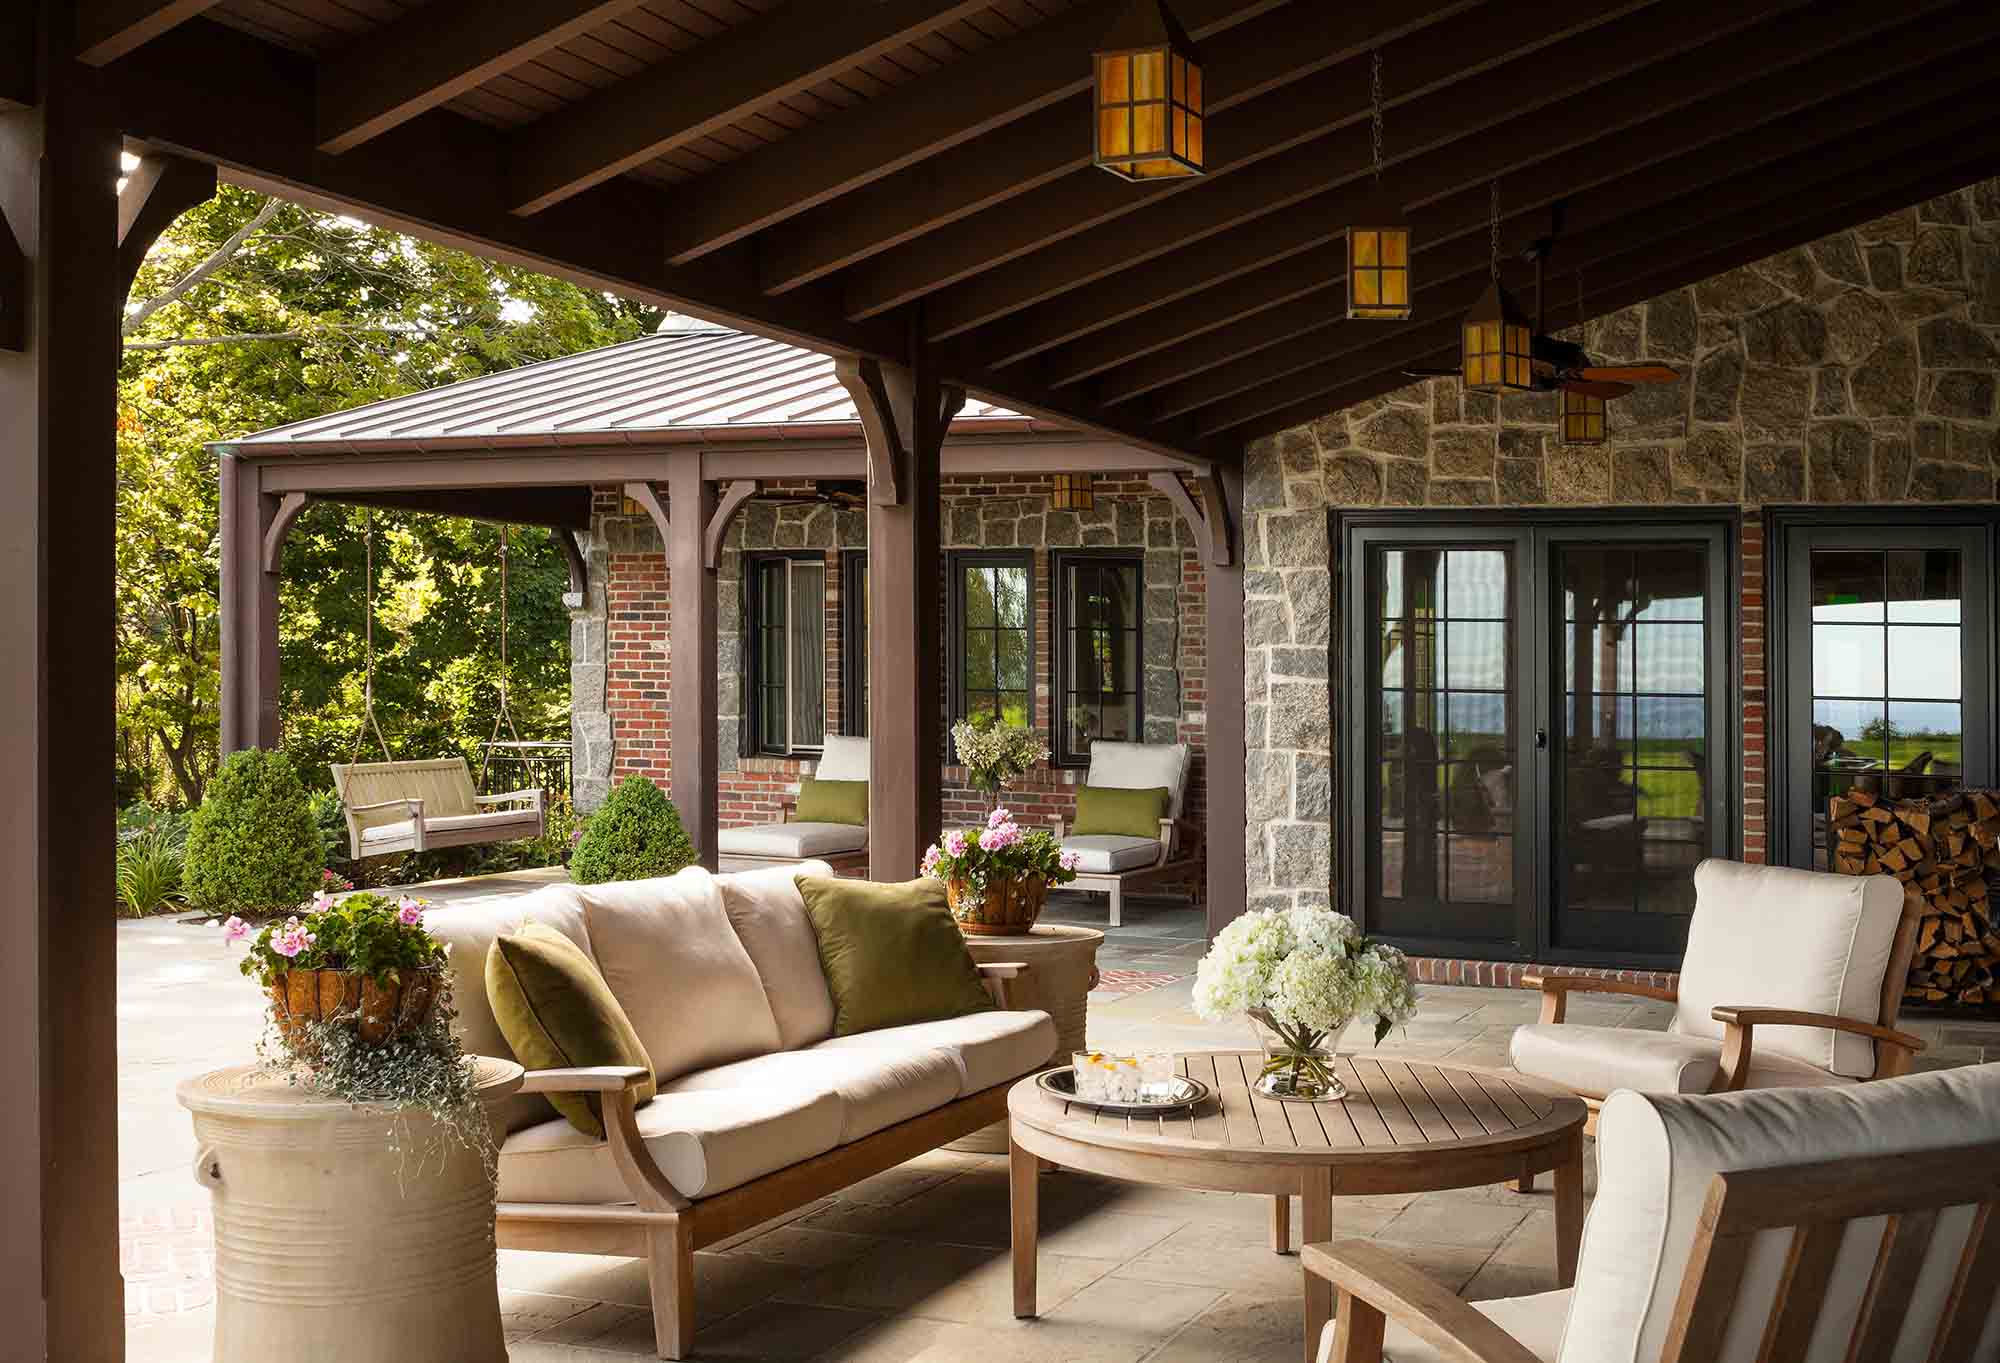 Arts & Crafts style, Nissequogue, Long Island, outdoor patio deck, swing